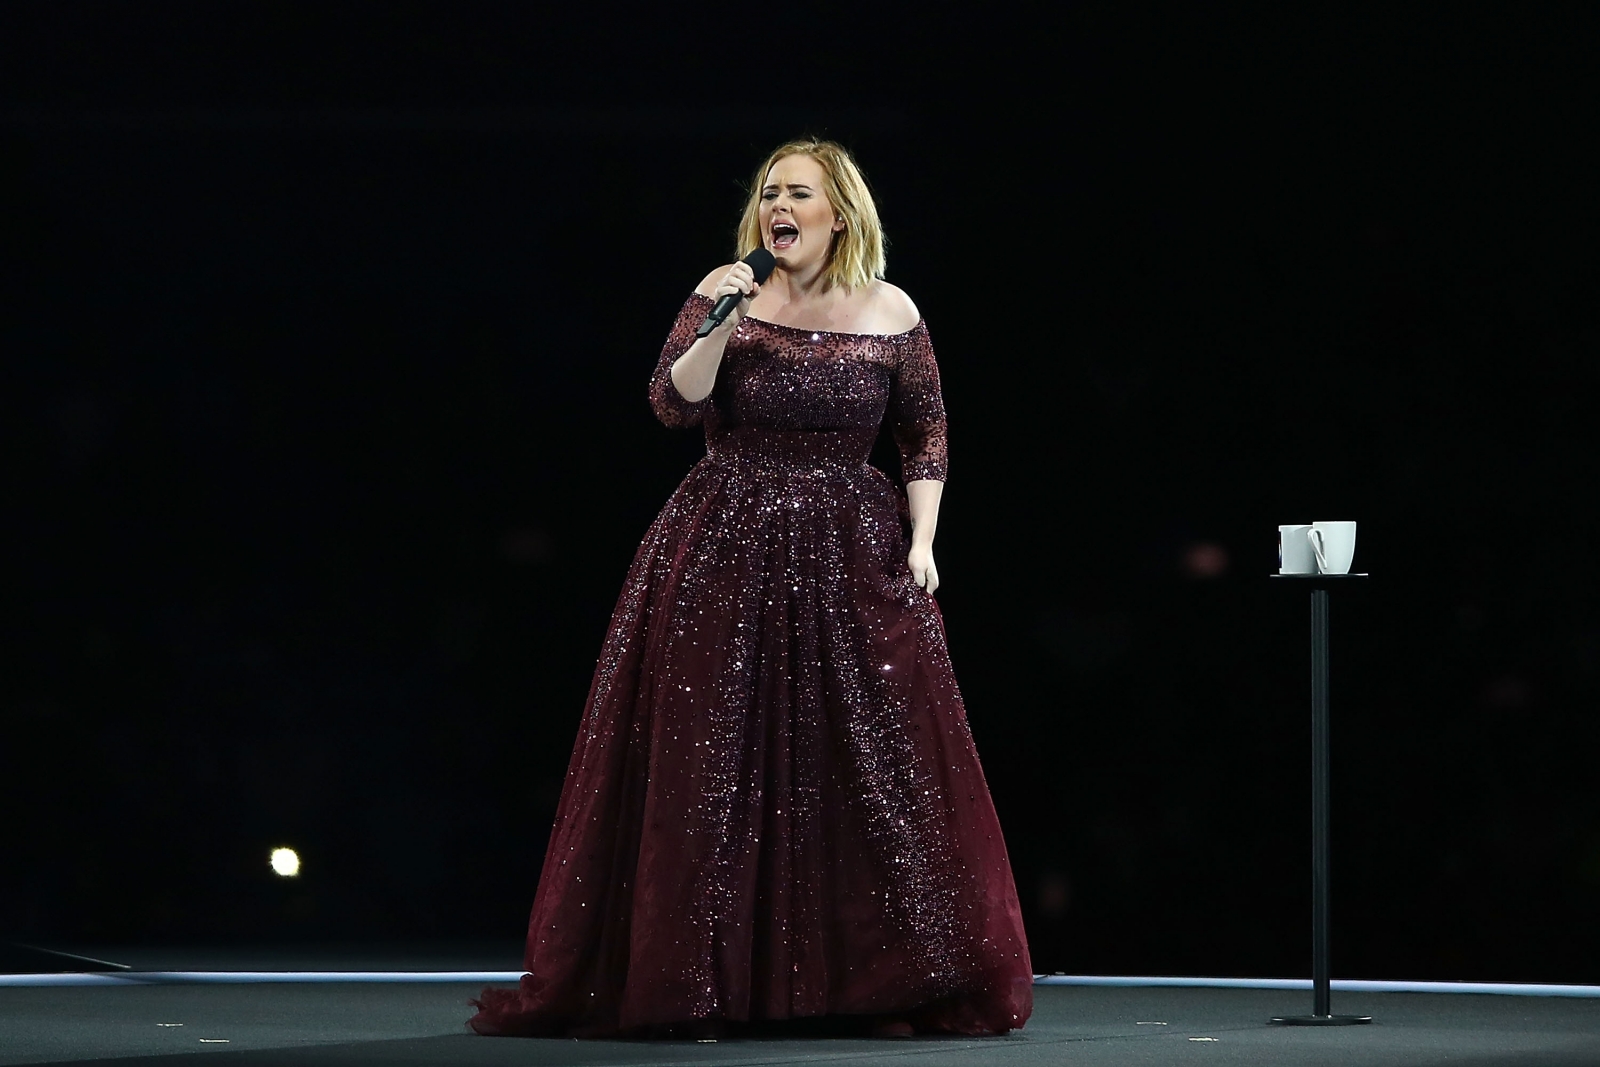 Adele almost falls over as she trips over gown during Brisbane concert